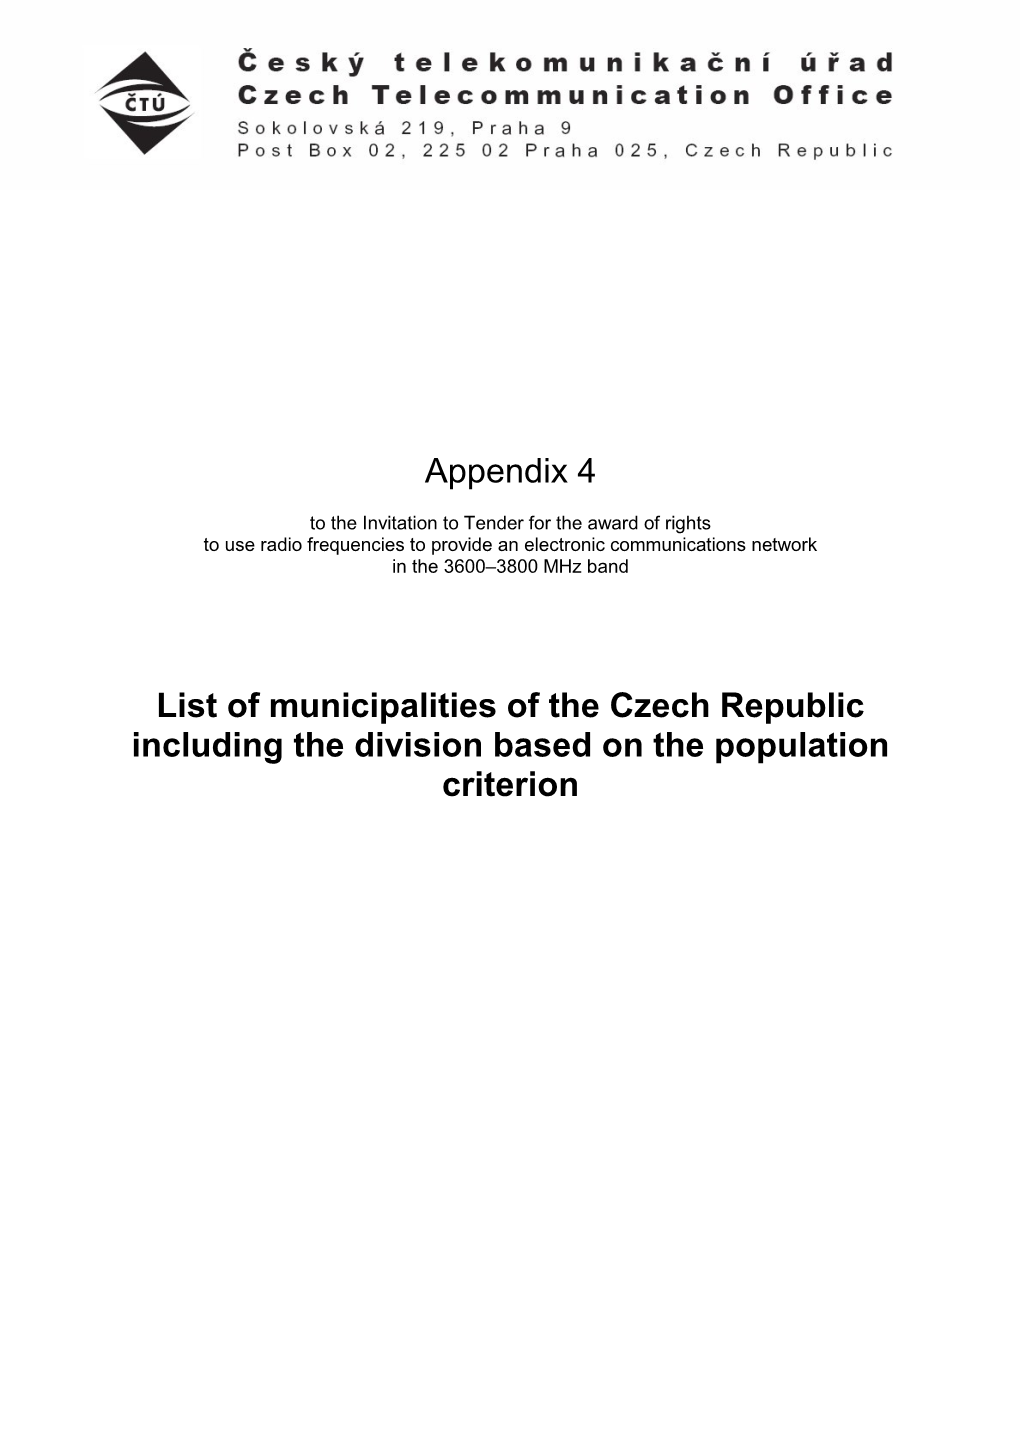 List of Municipalities of the Czech Republic Including the Division Based on the Population Criterion